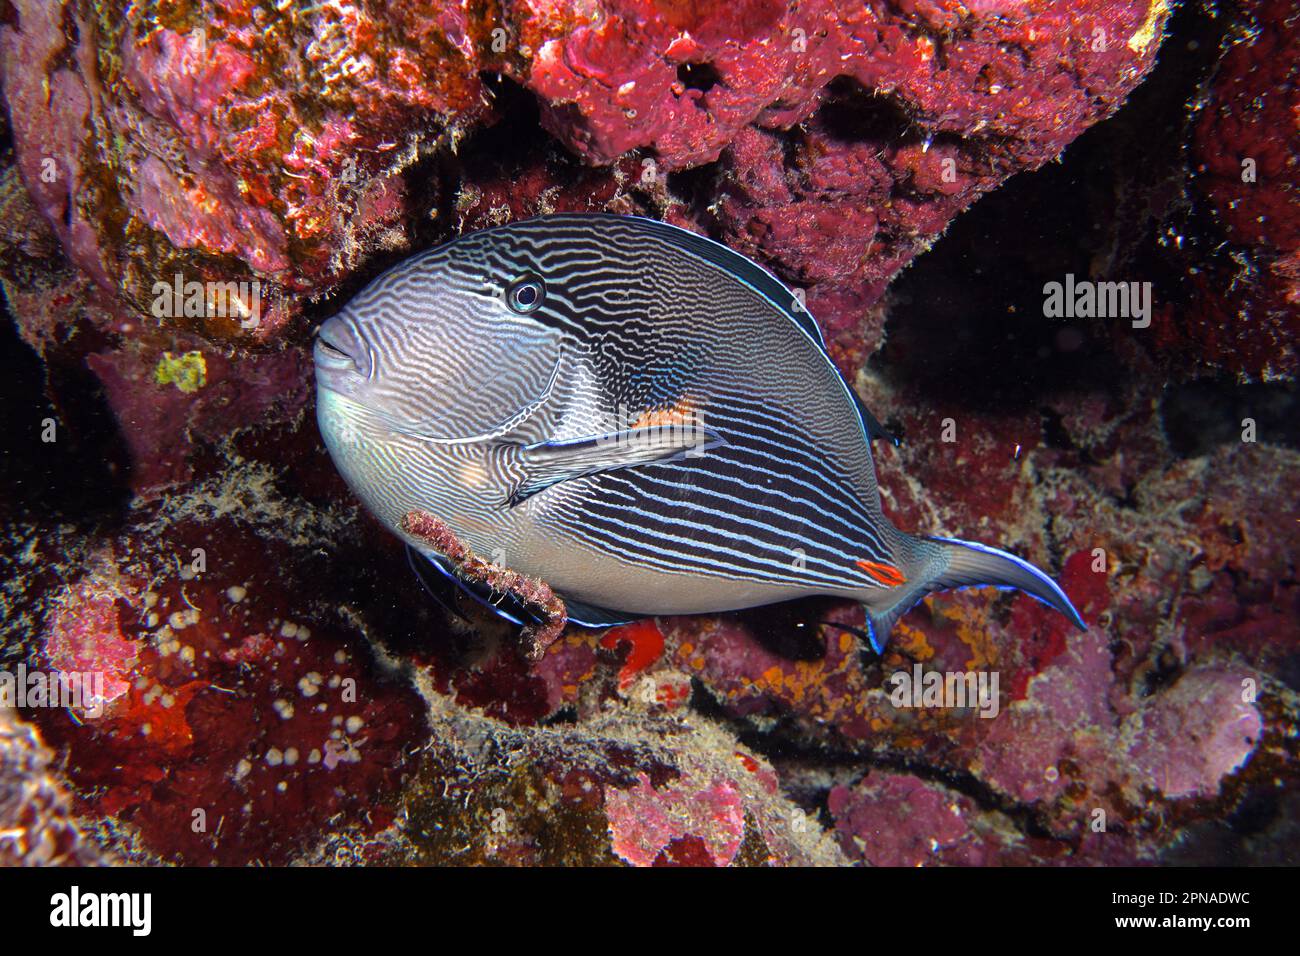 Red sea clown surgeon (Acanthurus sohal) at night in the red reef. Dive site Abu Fendera, Egypt, Red Sea Stock Photo